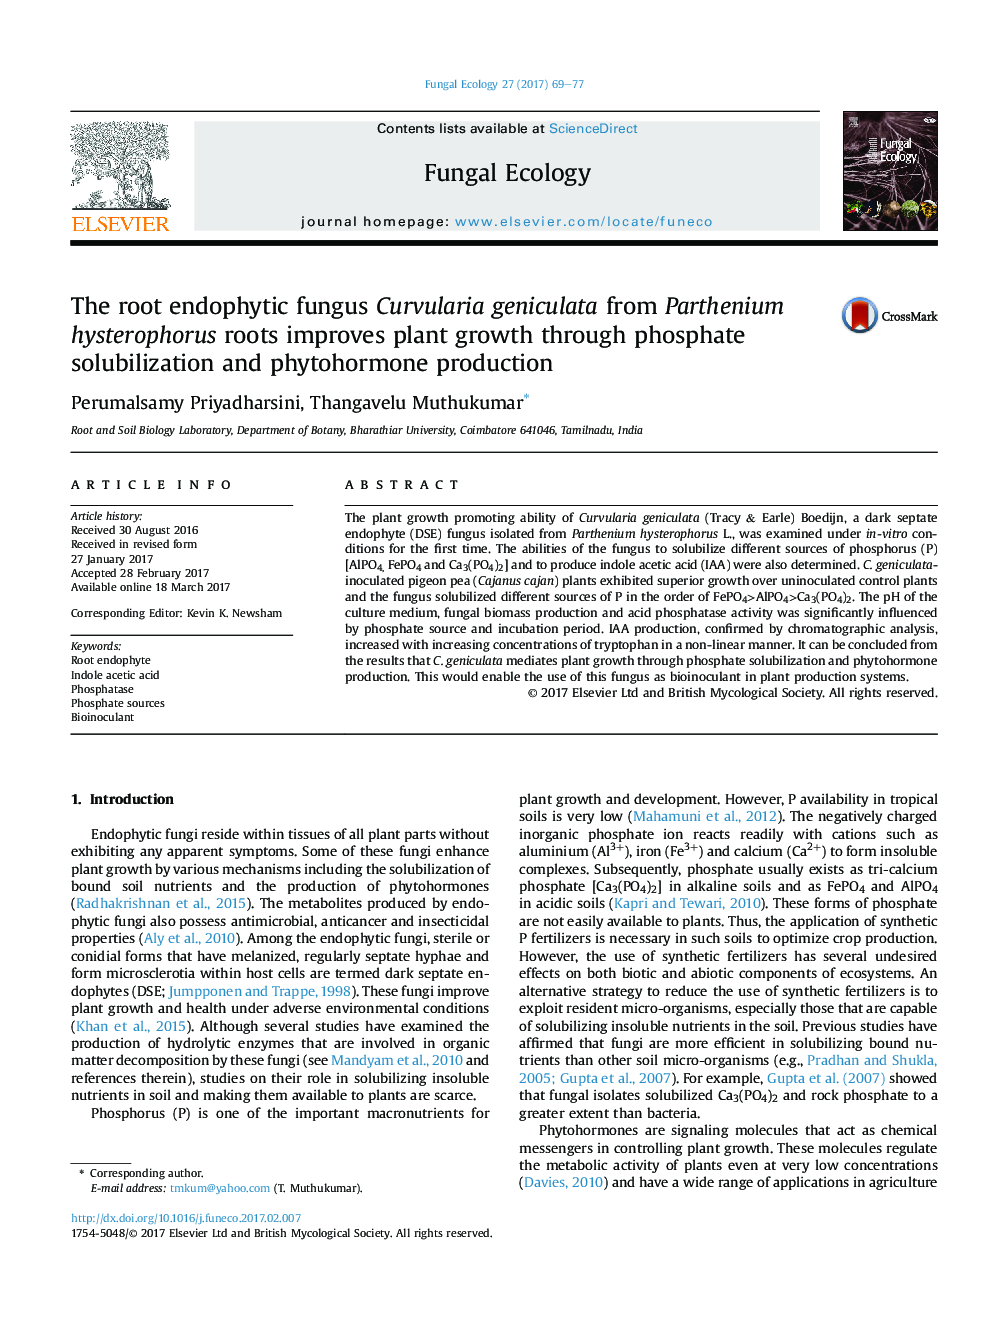 The root endophytic fungus Curvularia geniculata from Parthenium hysterophorus roots improves plant growth through phosphate solubilization and phytohormone production